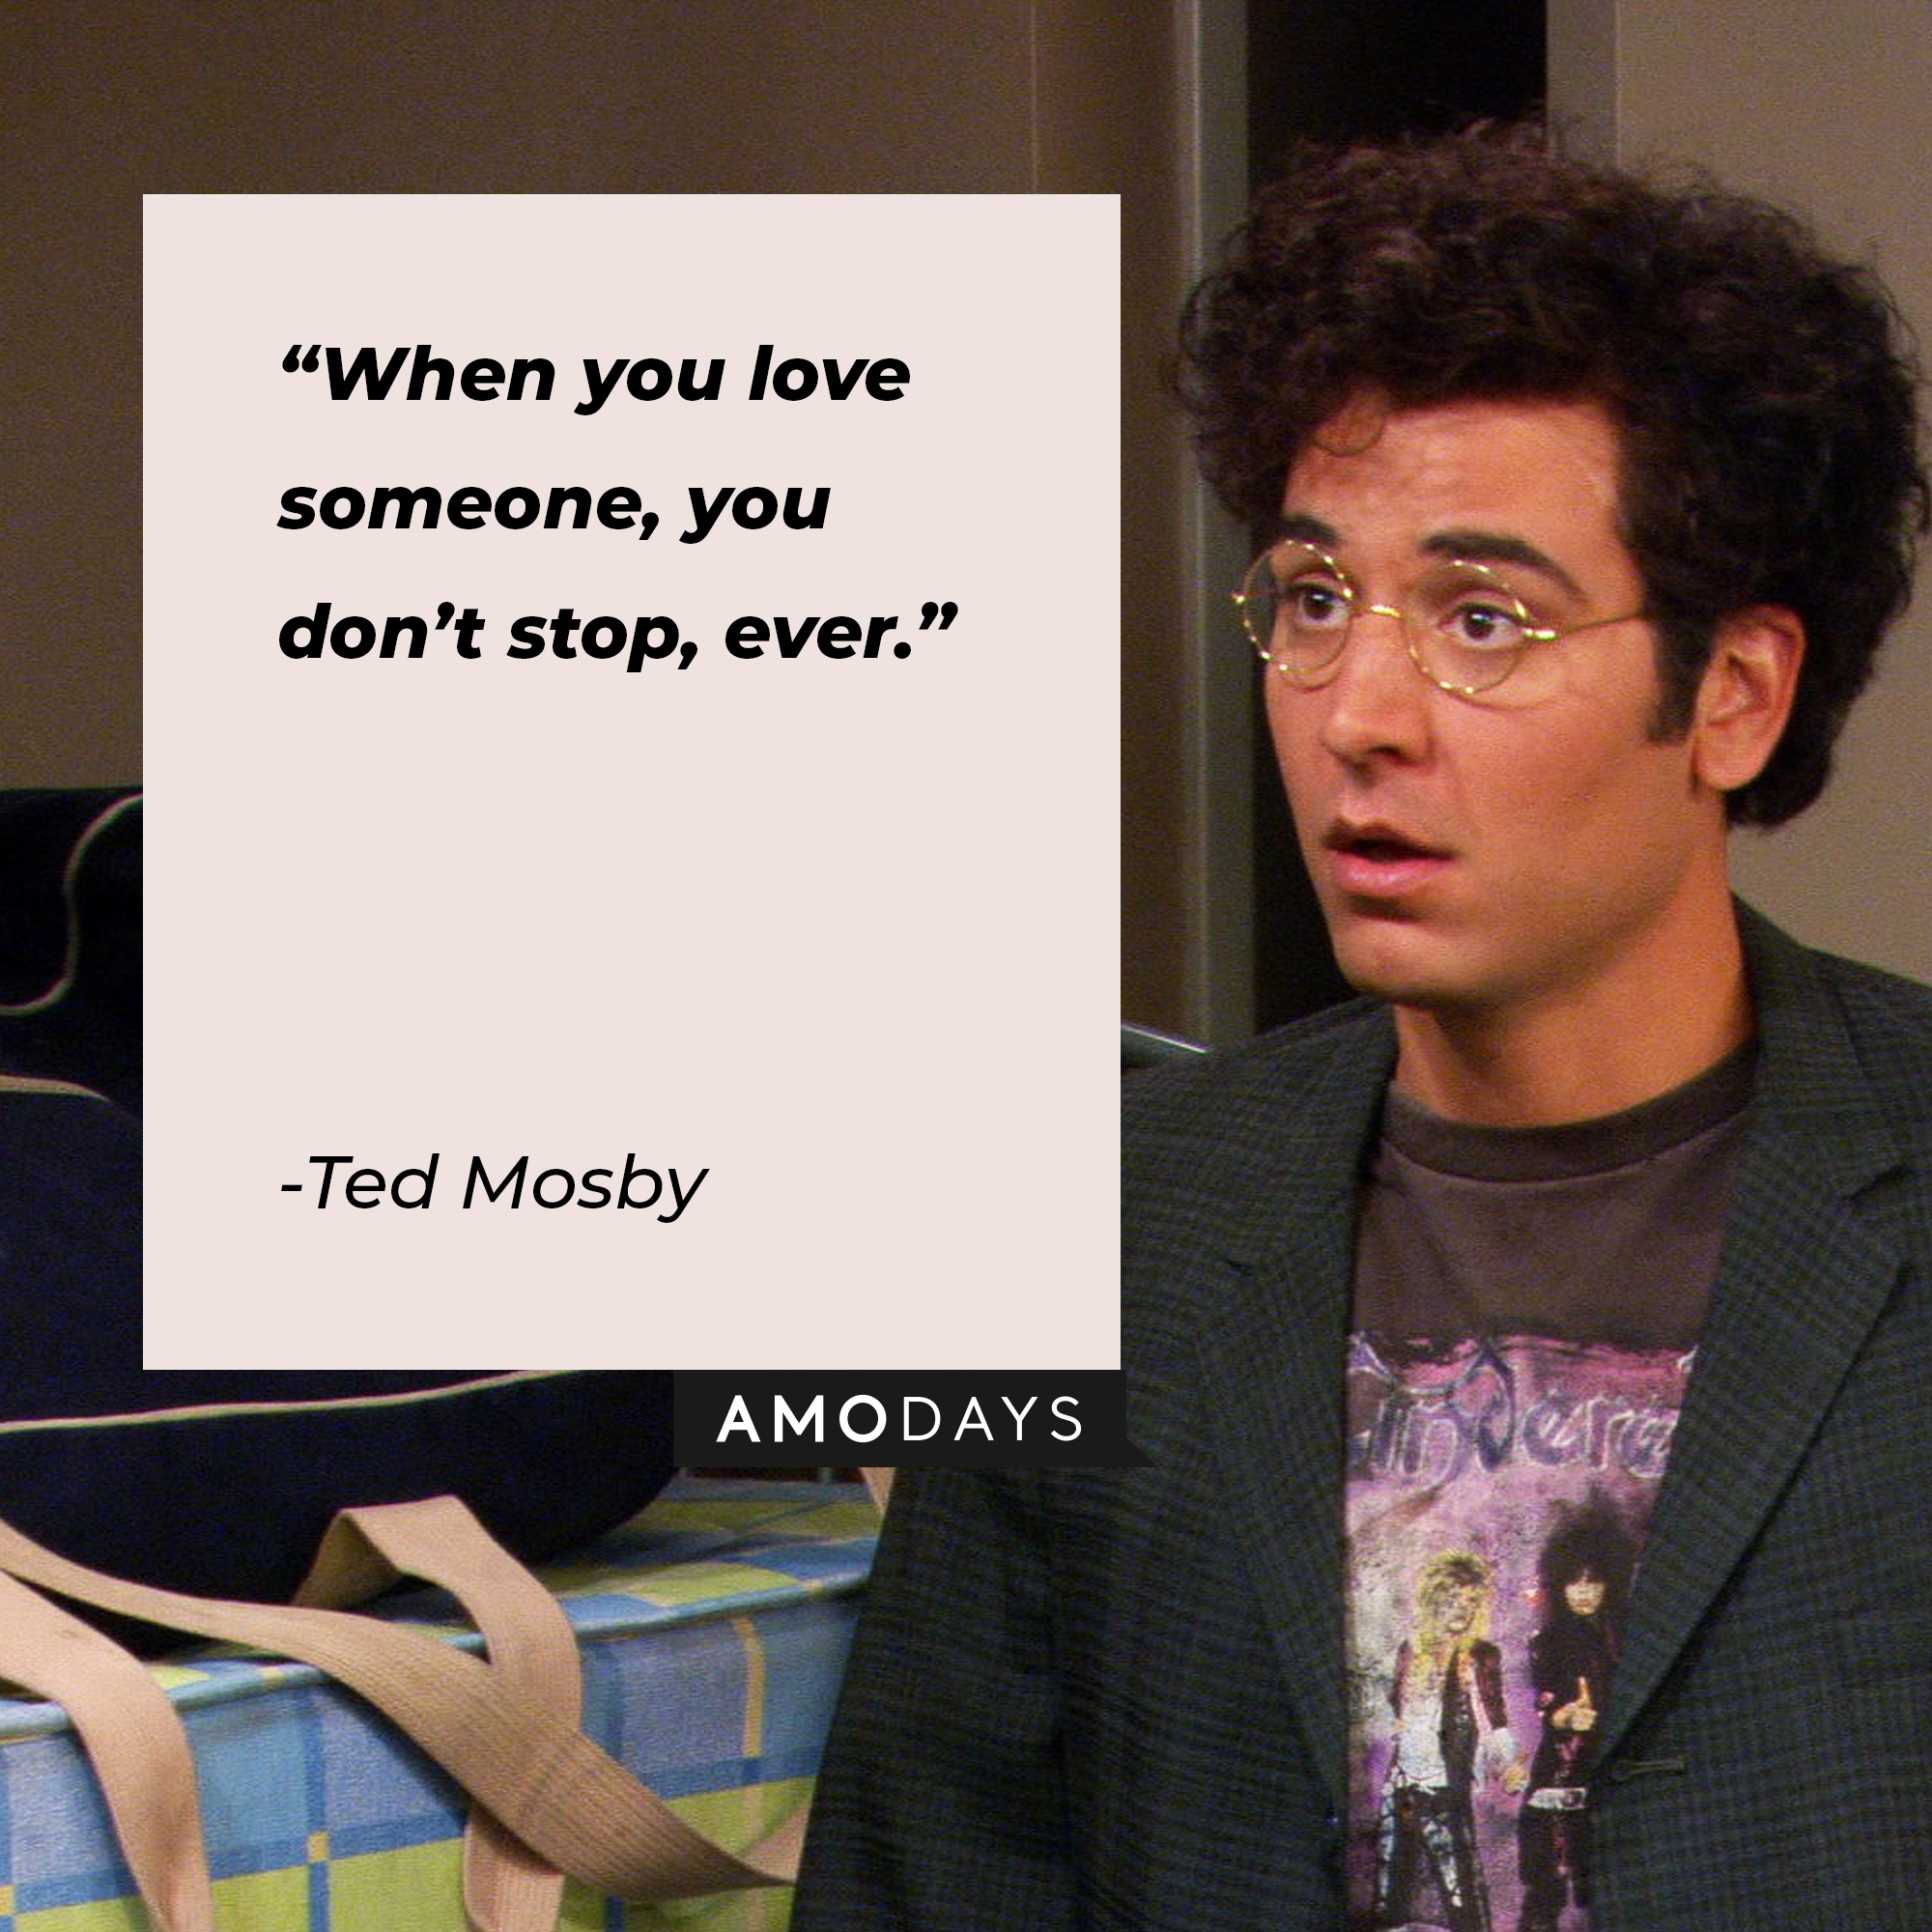 A picture of Ted Mosby with his quote, “When you love someone, you don’t stop, ever.” | Source: facebook.com/OfficialHowIMetYourMother